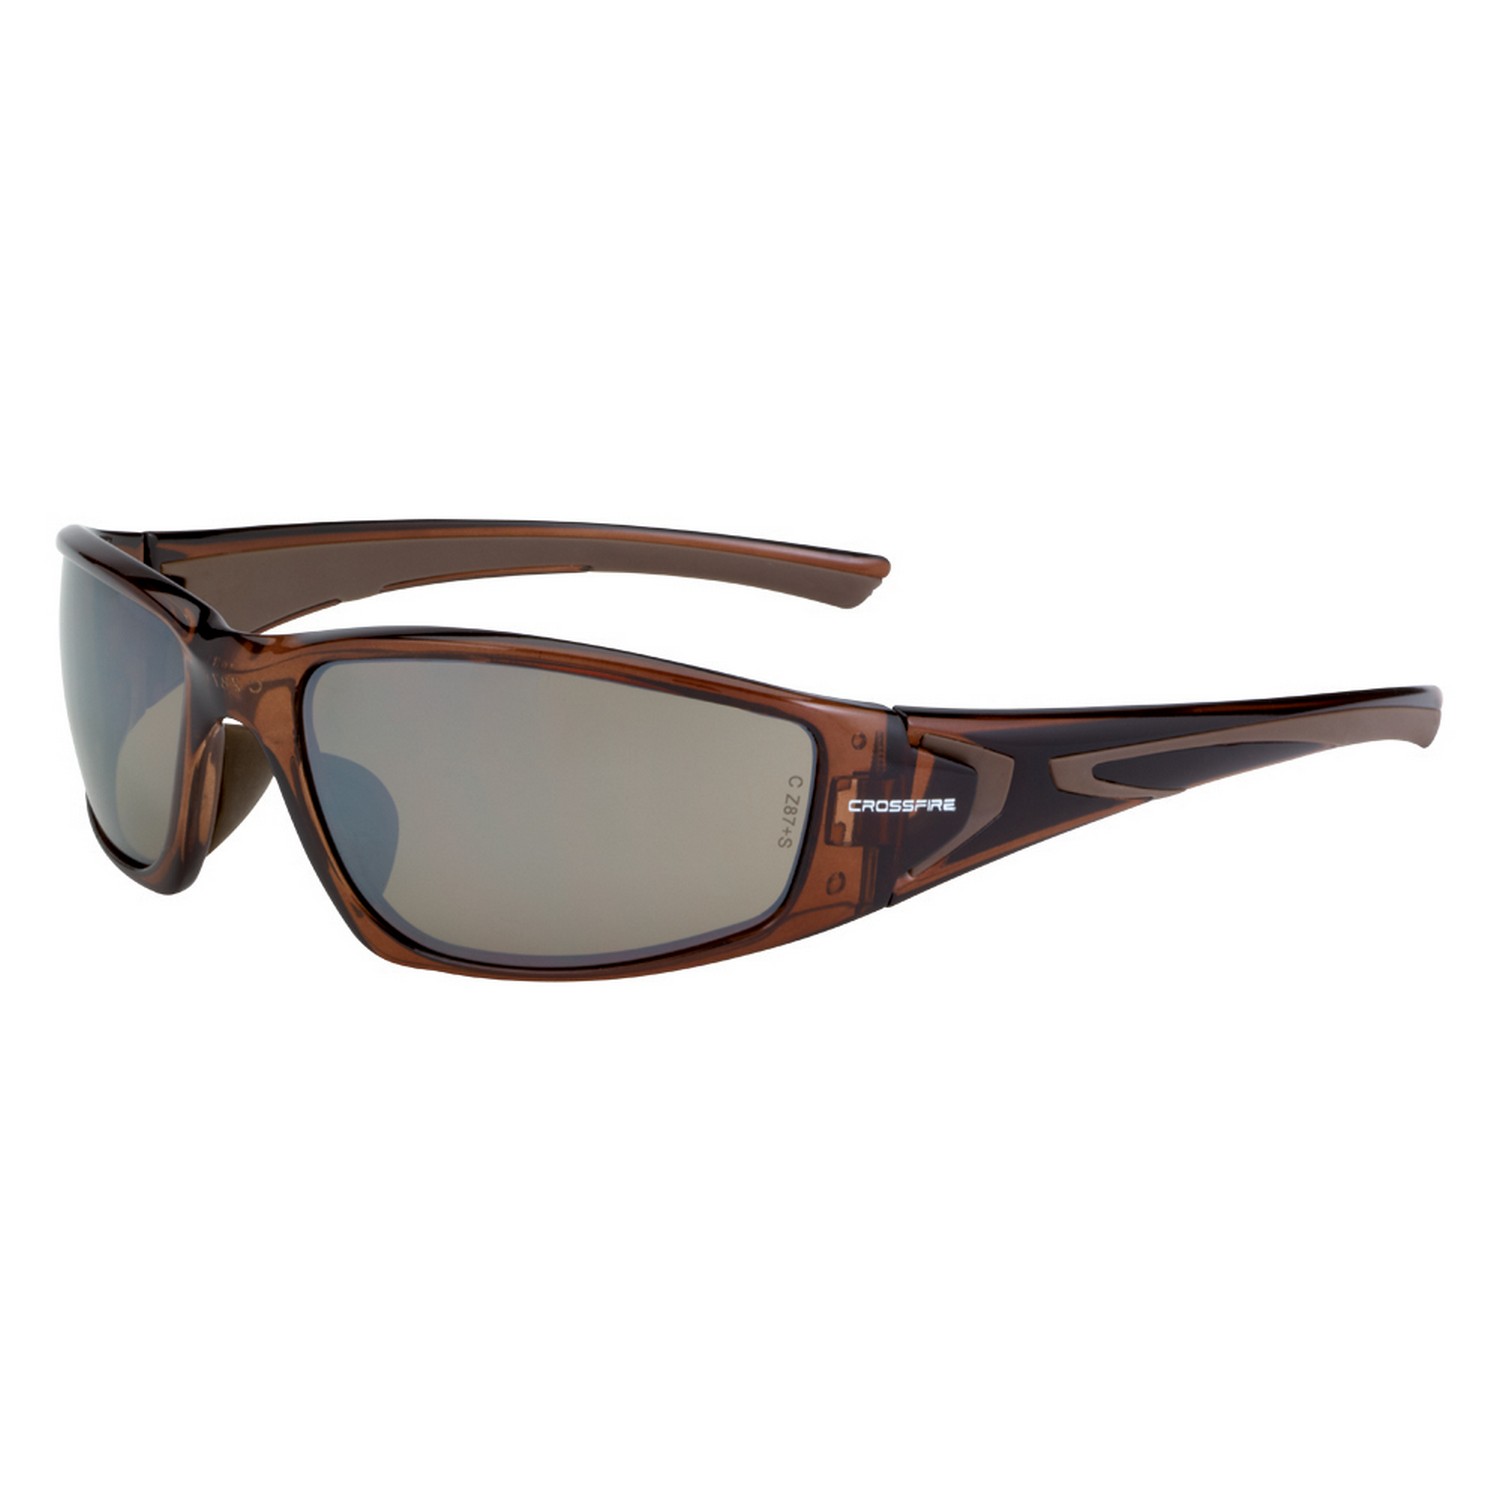 Crossfire Safety Glasses - Cobra - Brown Frame - HD Brown Mirror Lens 15117